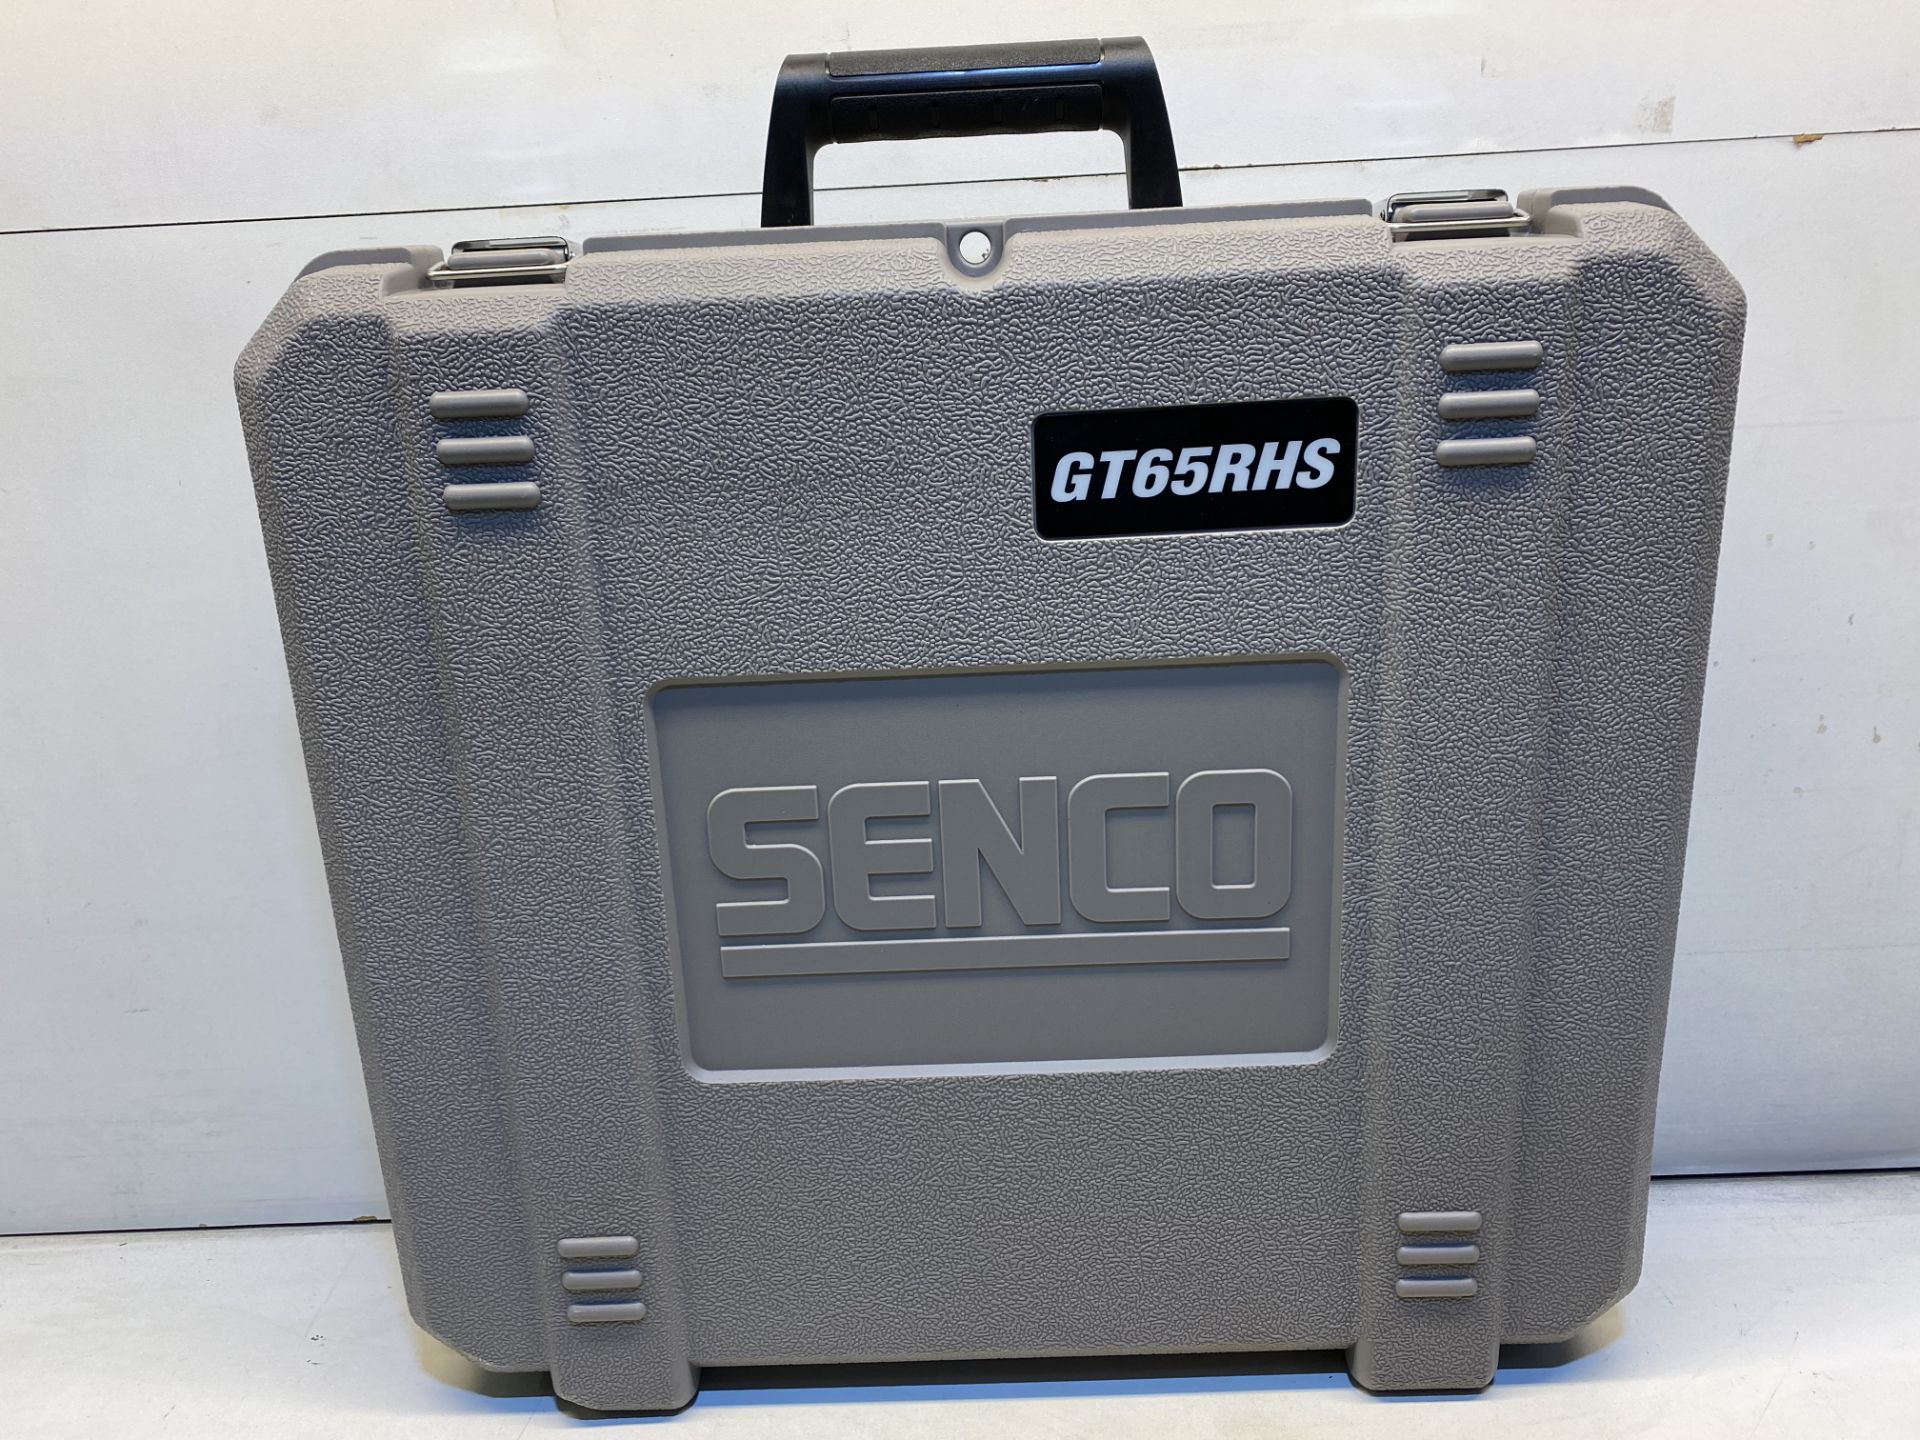 Senco GT65RHS Cordless Finish Nailer | Empty Carry Case - Image 2 of 4